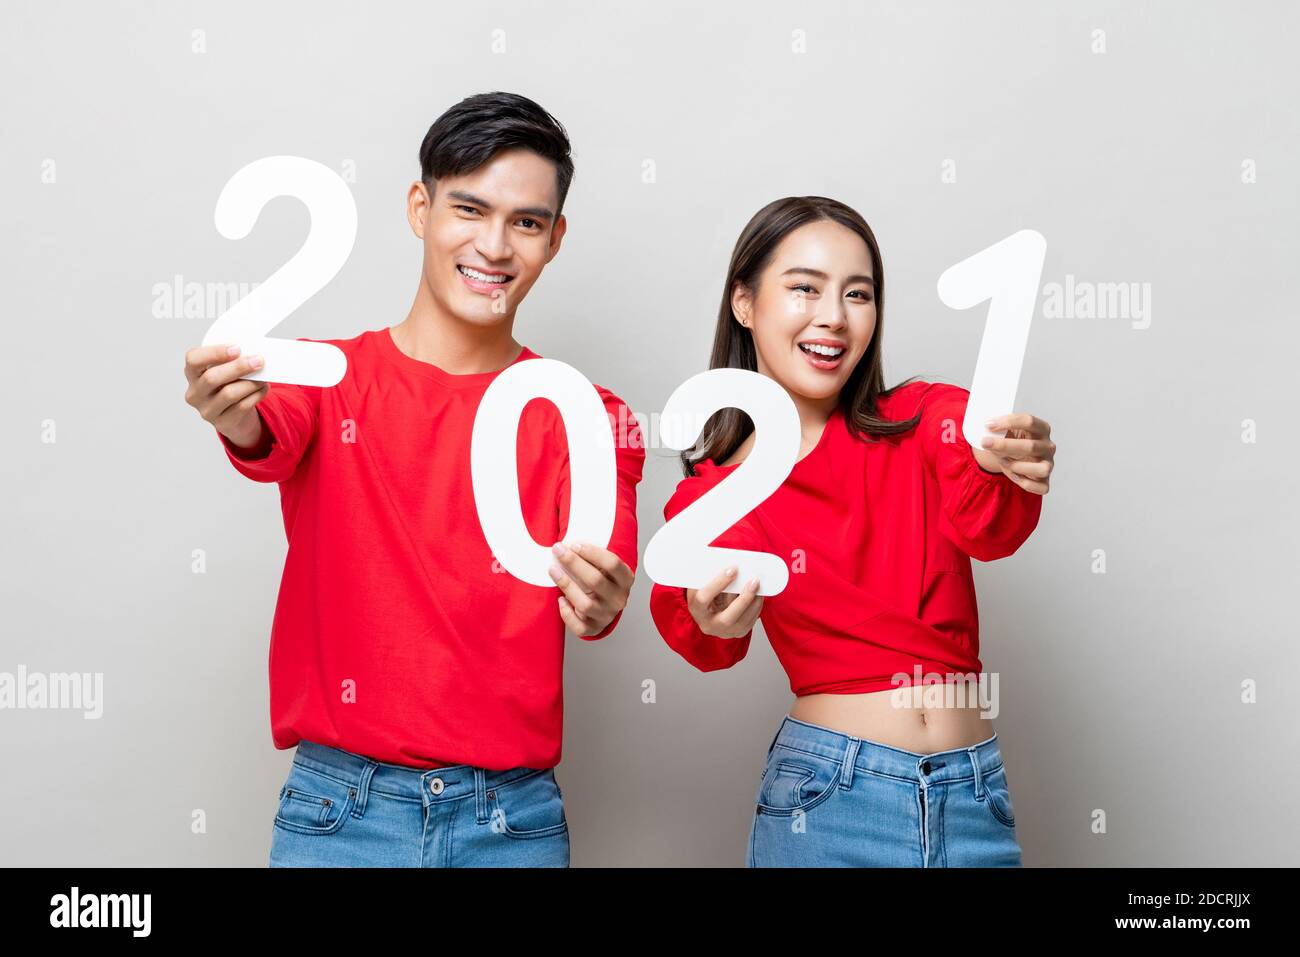 Happy Asian couple smiling and showing number 2021 for new year concept on light gray studio background Stock Photo